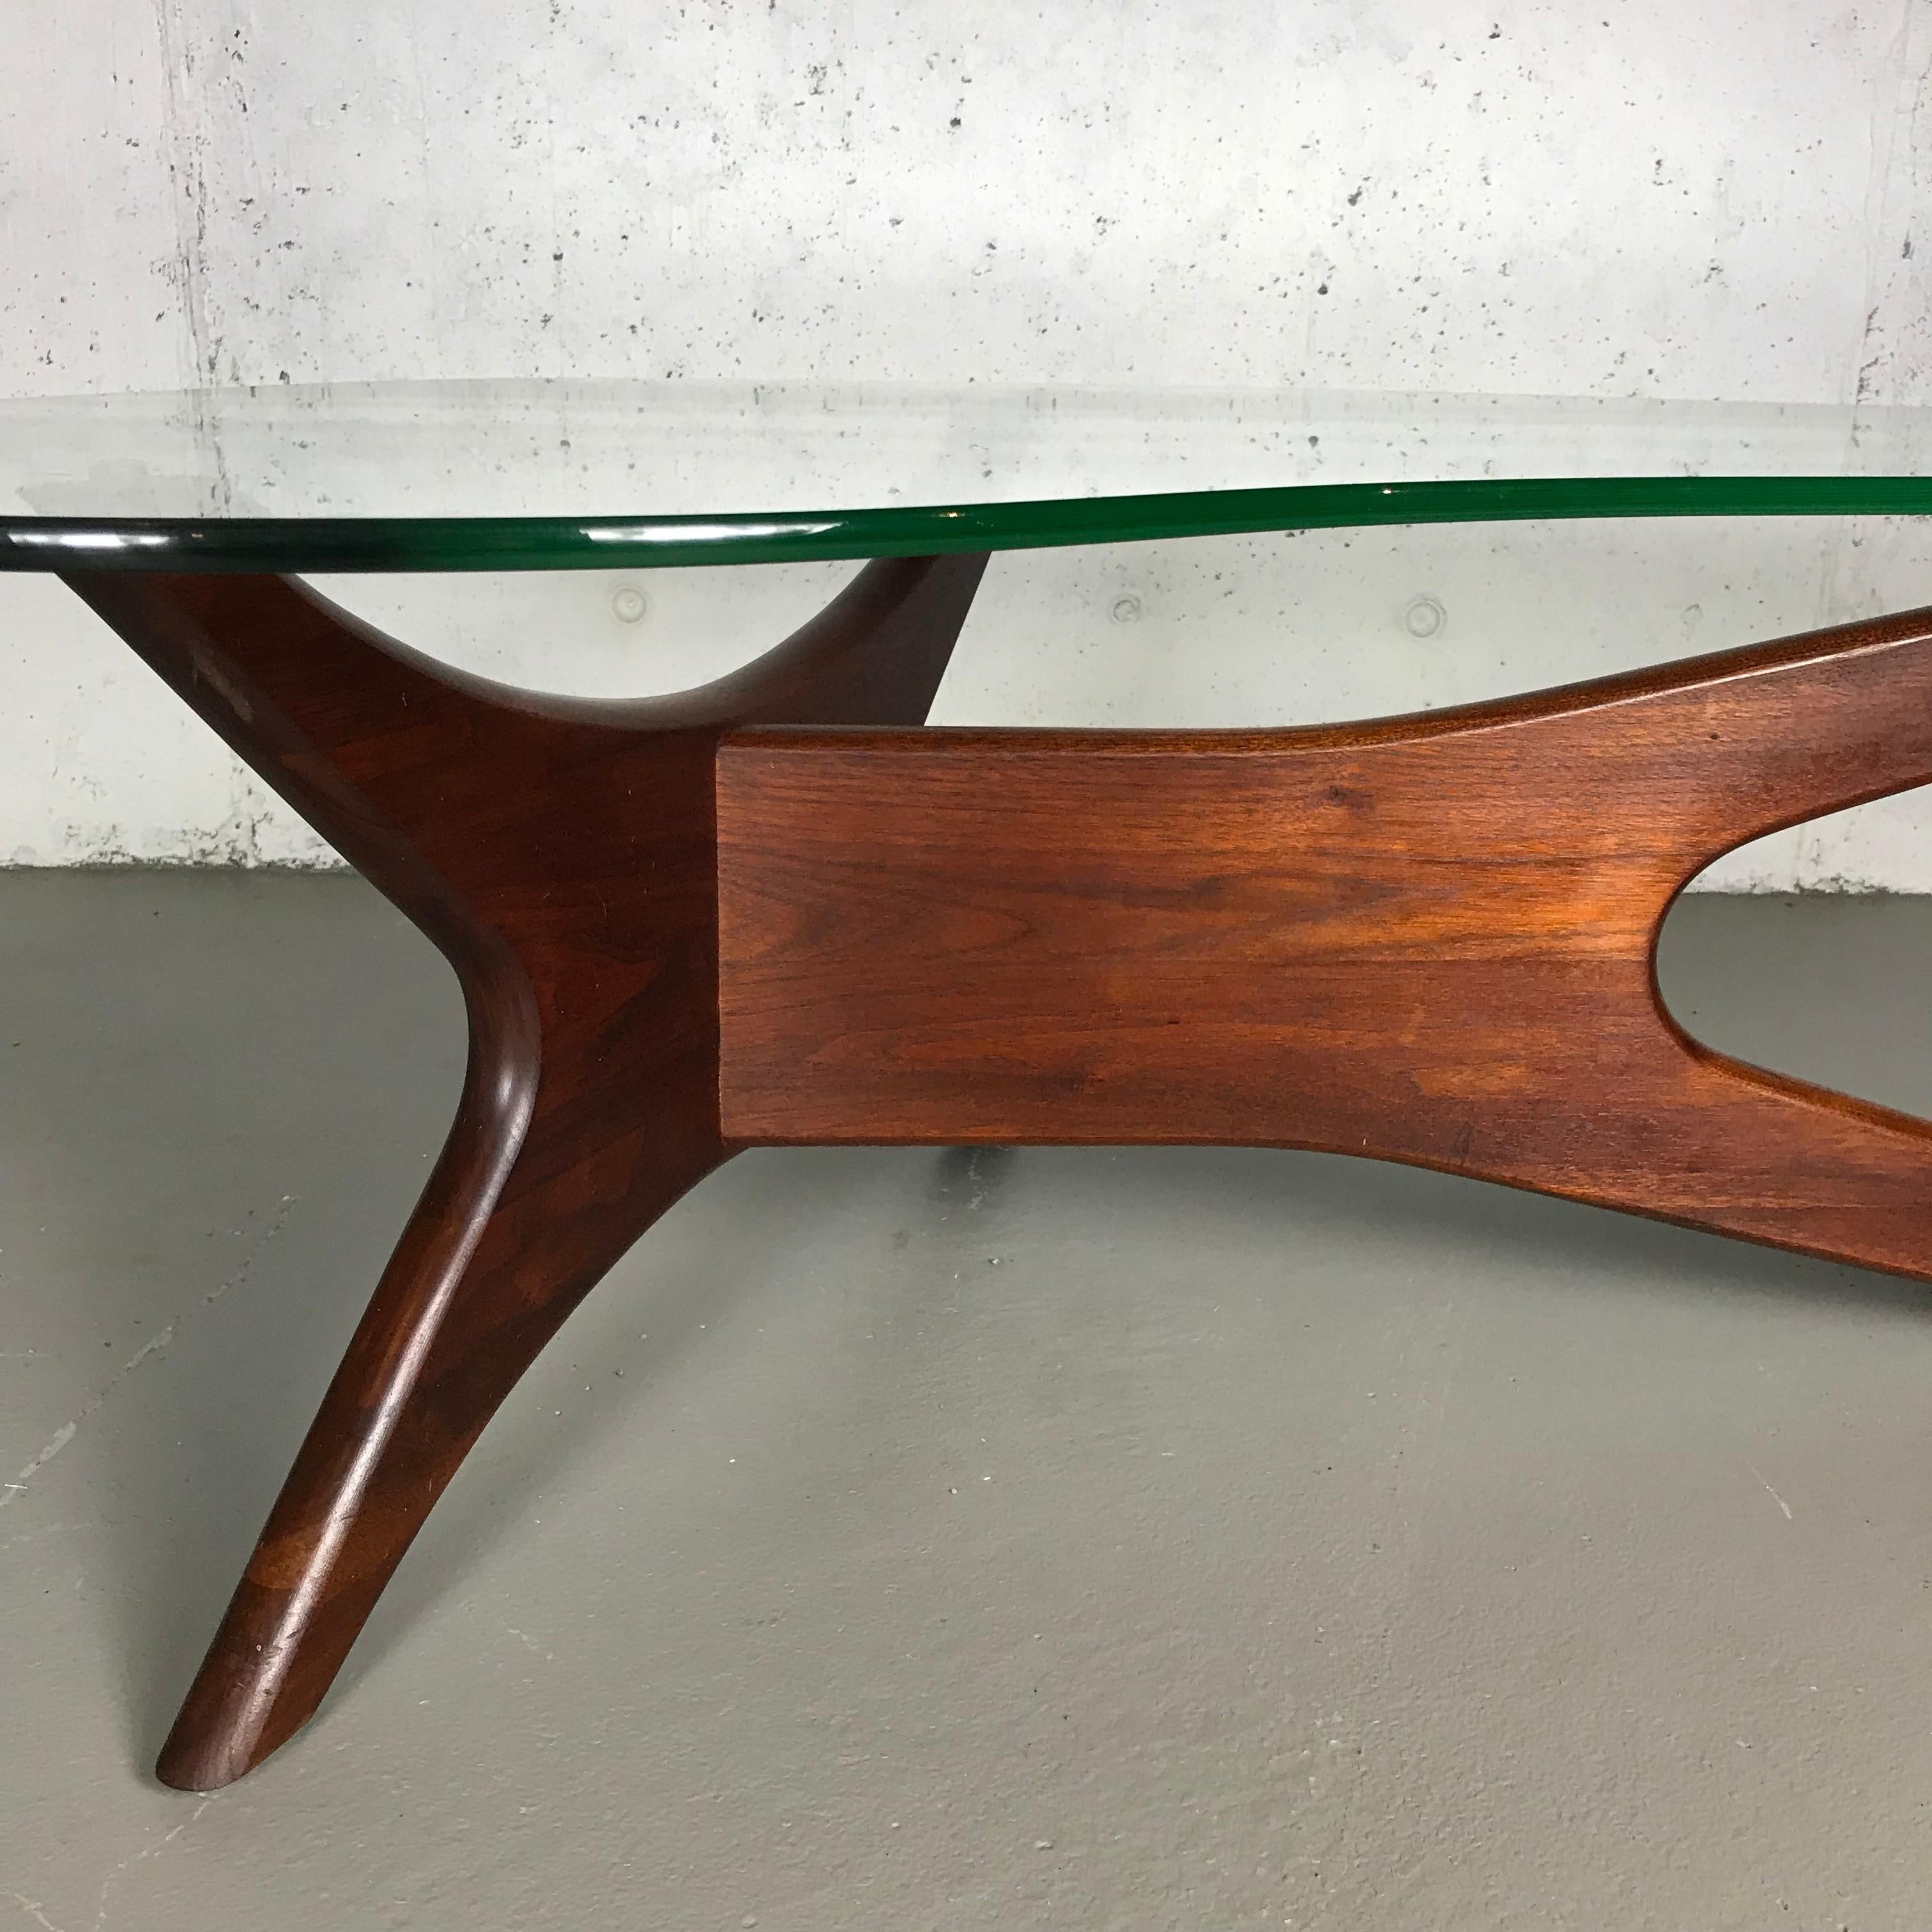 North American Sculptural Walnut & Glass Cocktail Table by Adrian Pearsall for Craft Associates